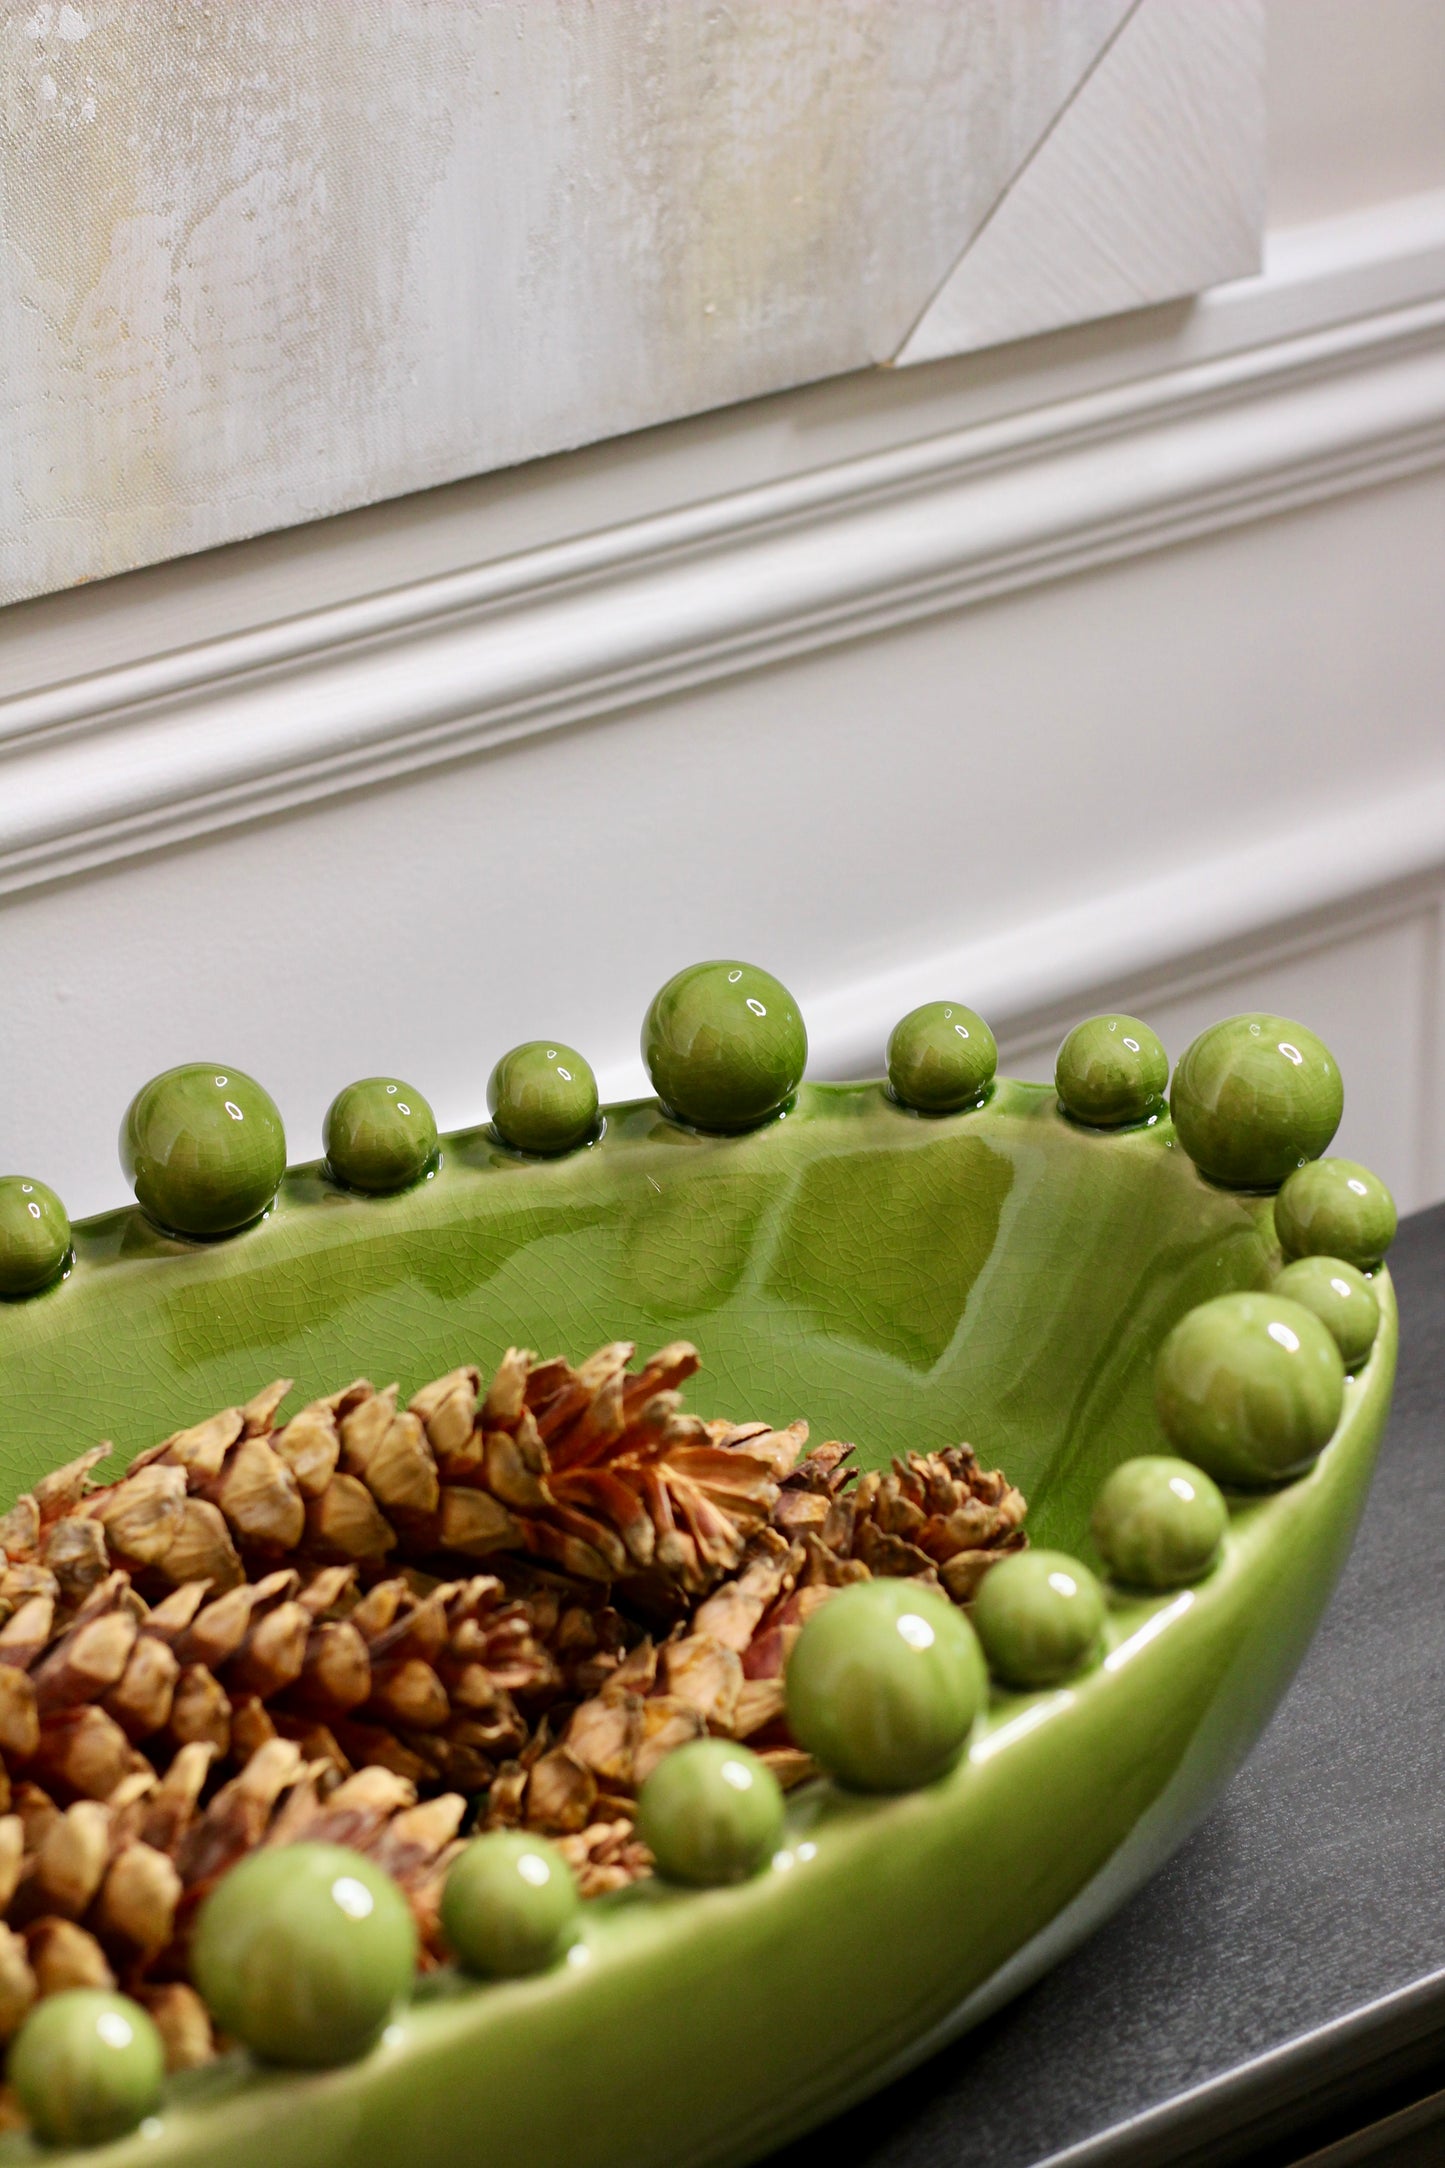 Green Oval Bowl With Bobbled Edge